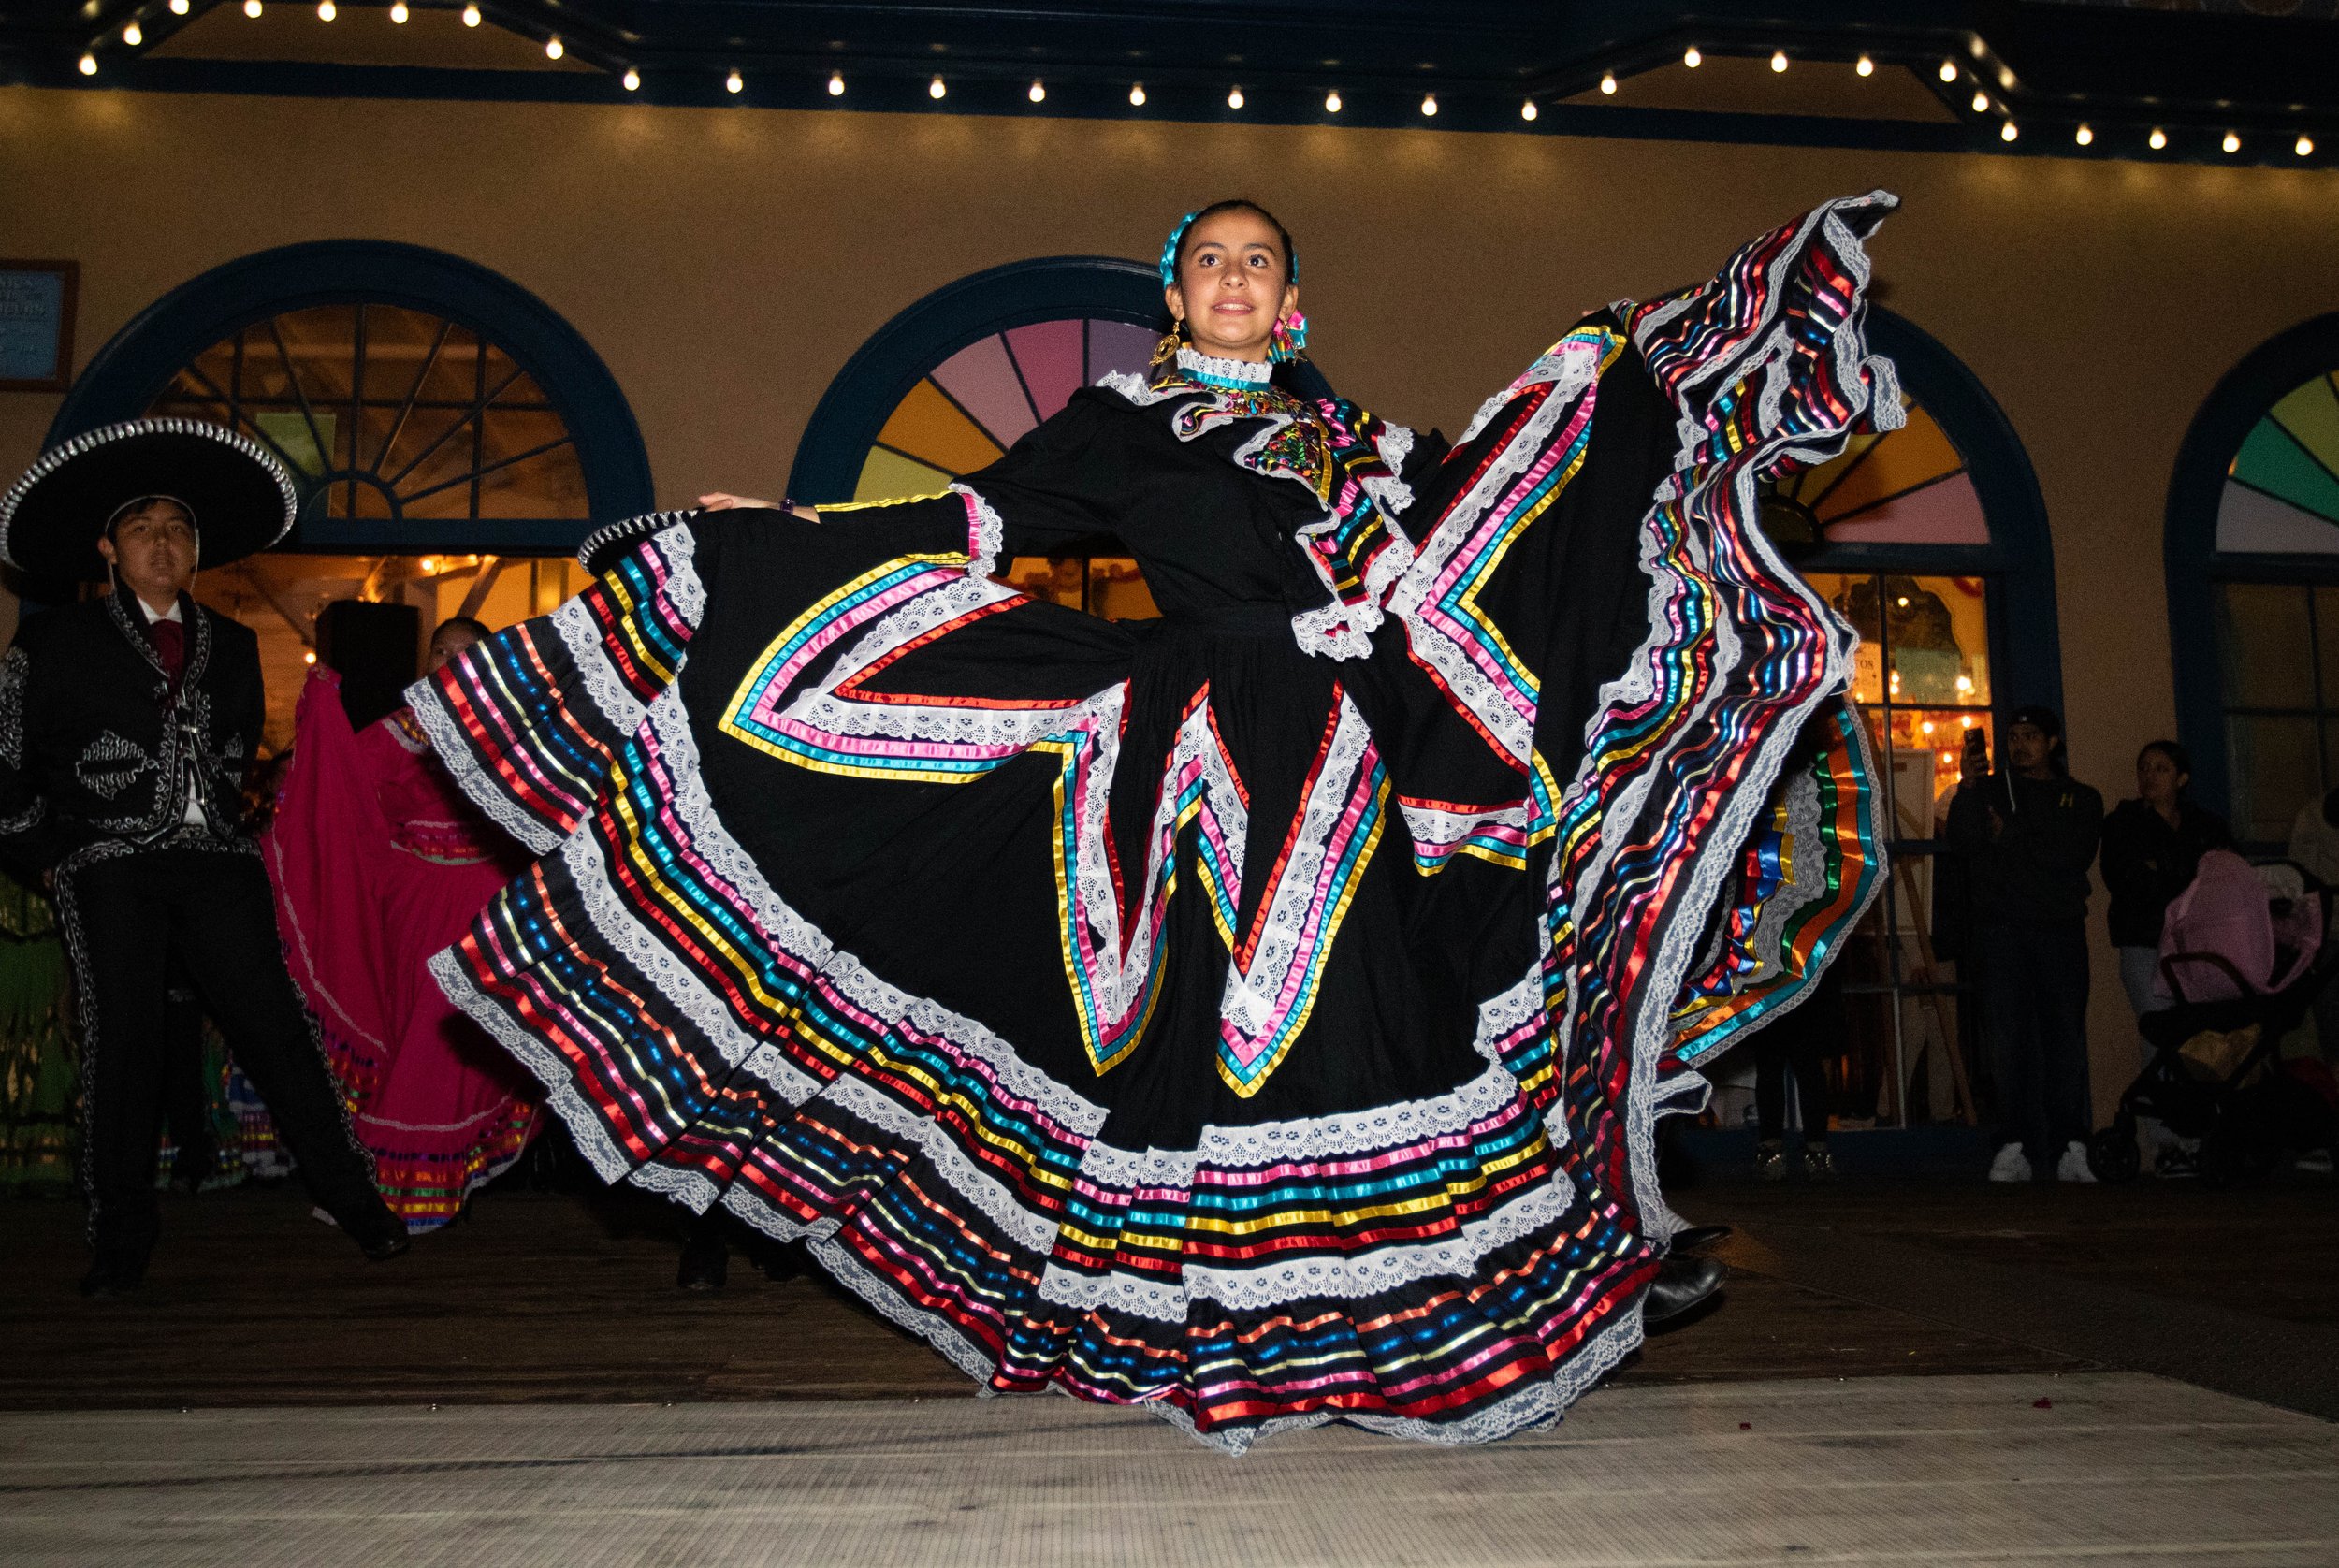  A young Ballet Folklorico performer at the Santa Monica Pier Día de los Muertos celebration on Nov. 2, 2022. In collaboration with artists, Daniel Alonzo and Sylvia Sanchez, Santa Monica Pier showcased a two-day public art installation in which comm